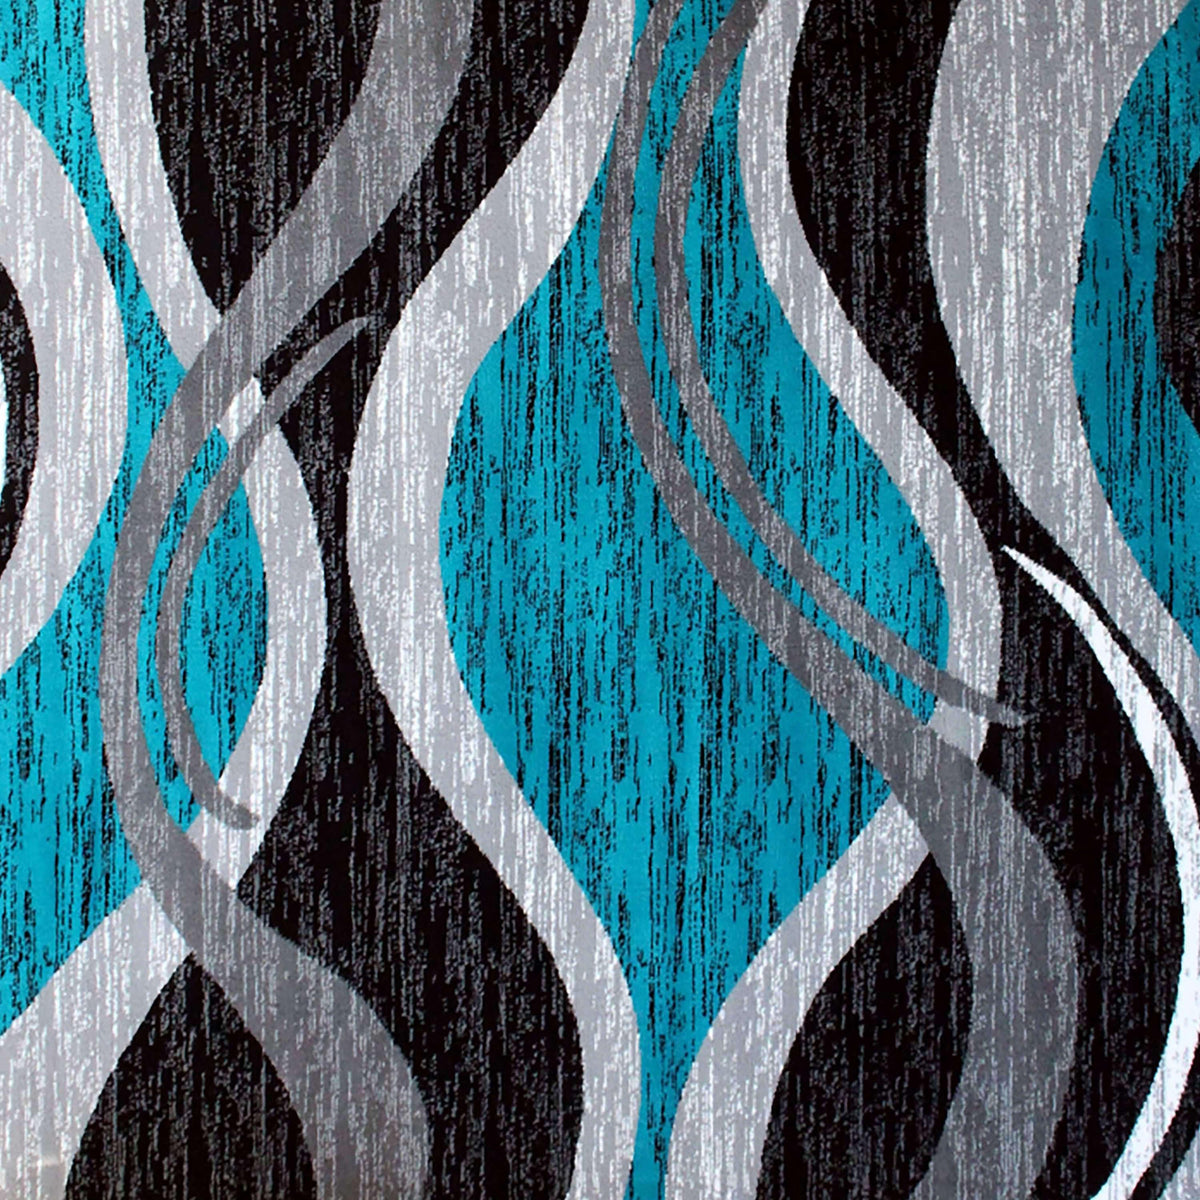 Turquoise,2' x 11' |#| Modern Ripple Abstract Area Rug - Turquoise, Black, White, & Gray - 2' x 11'